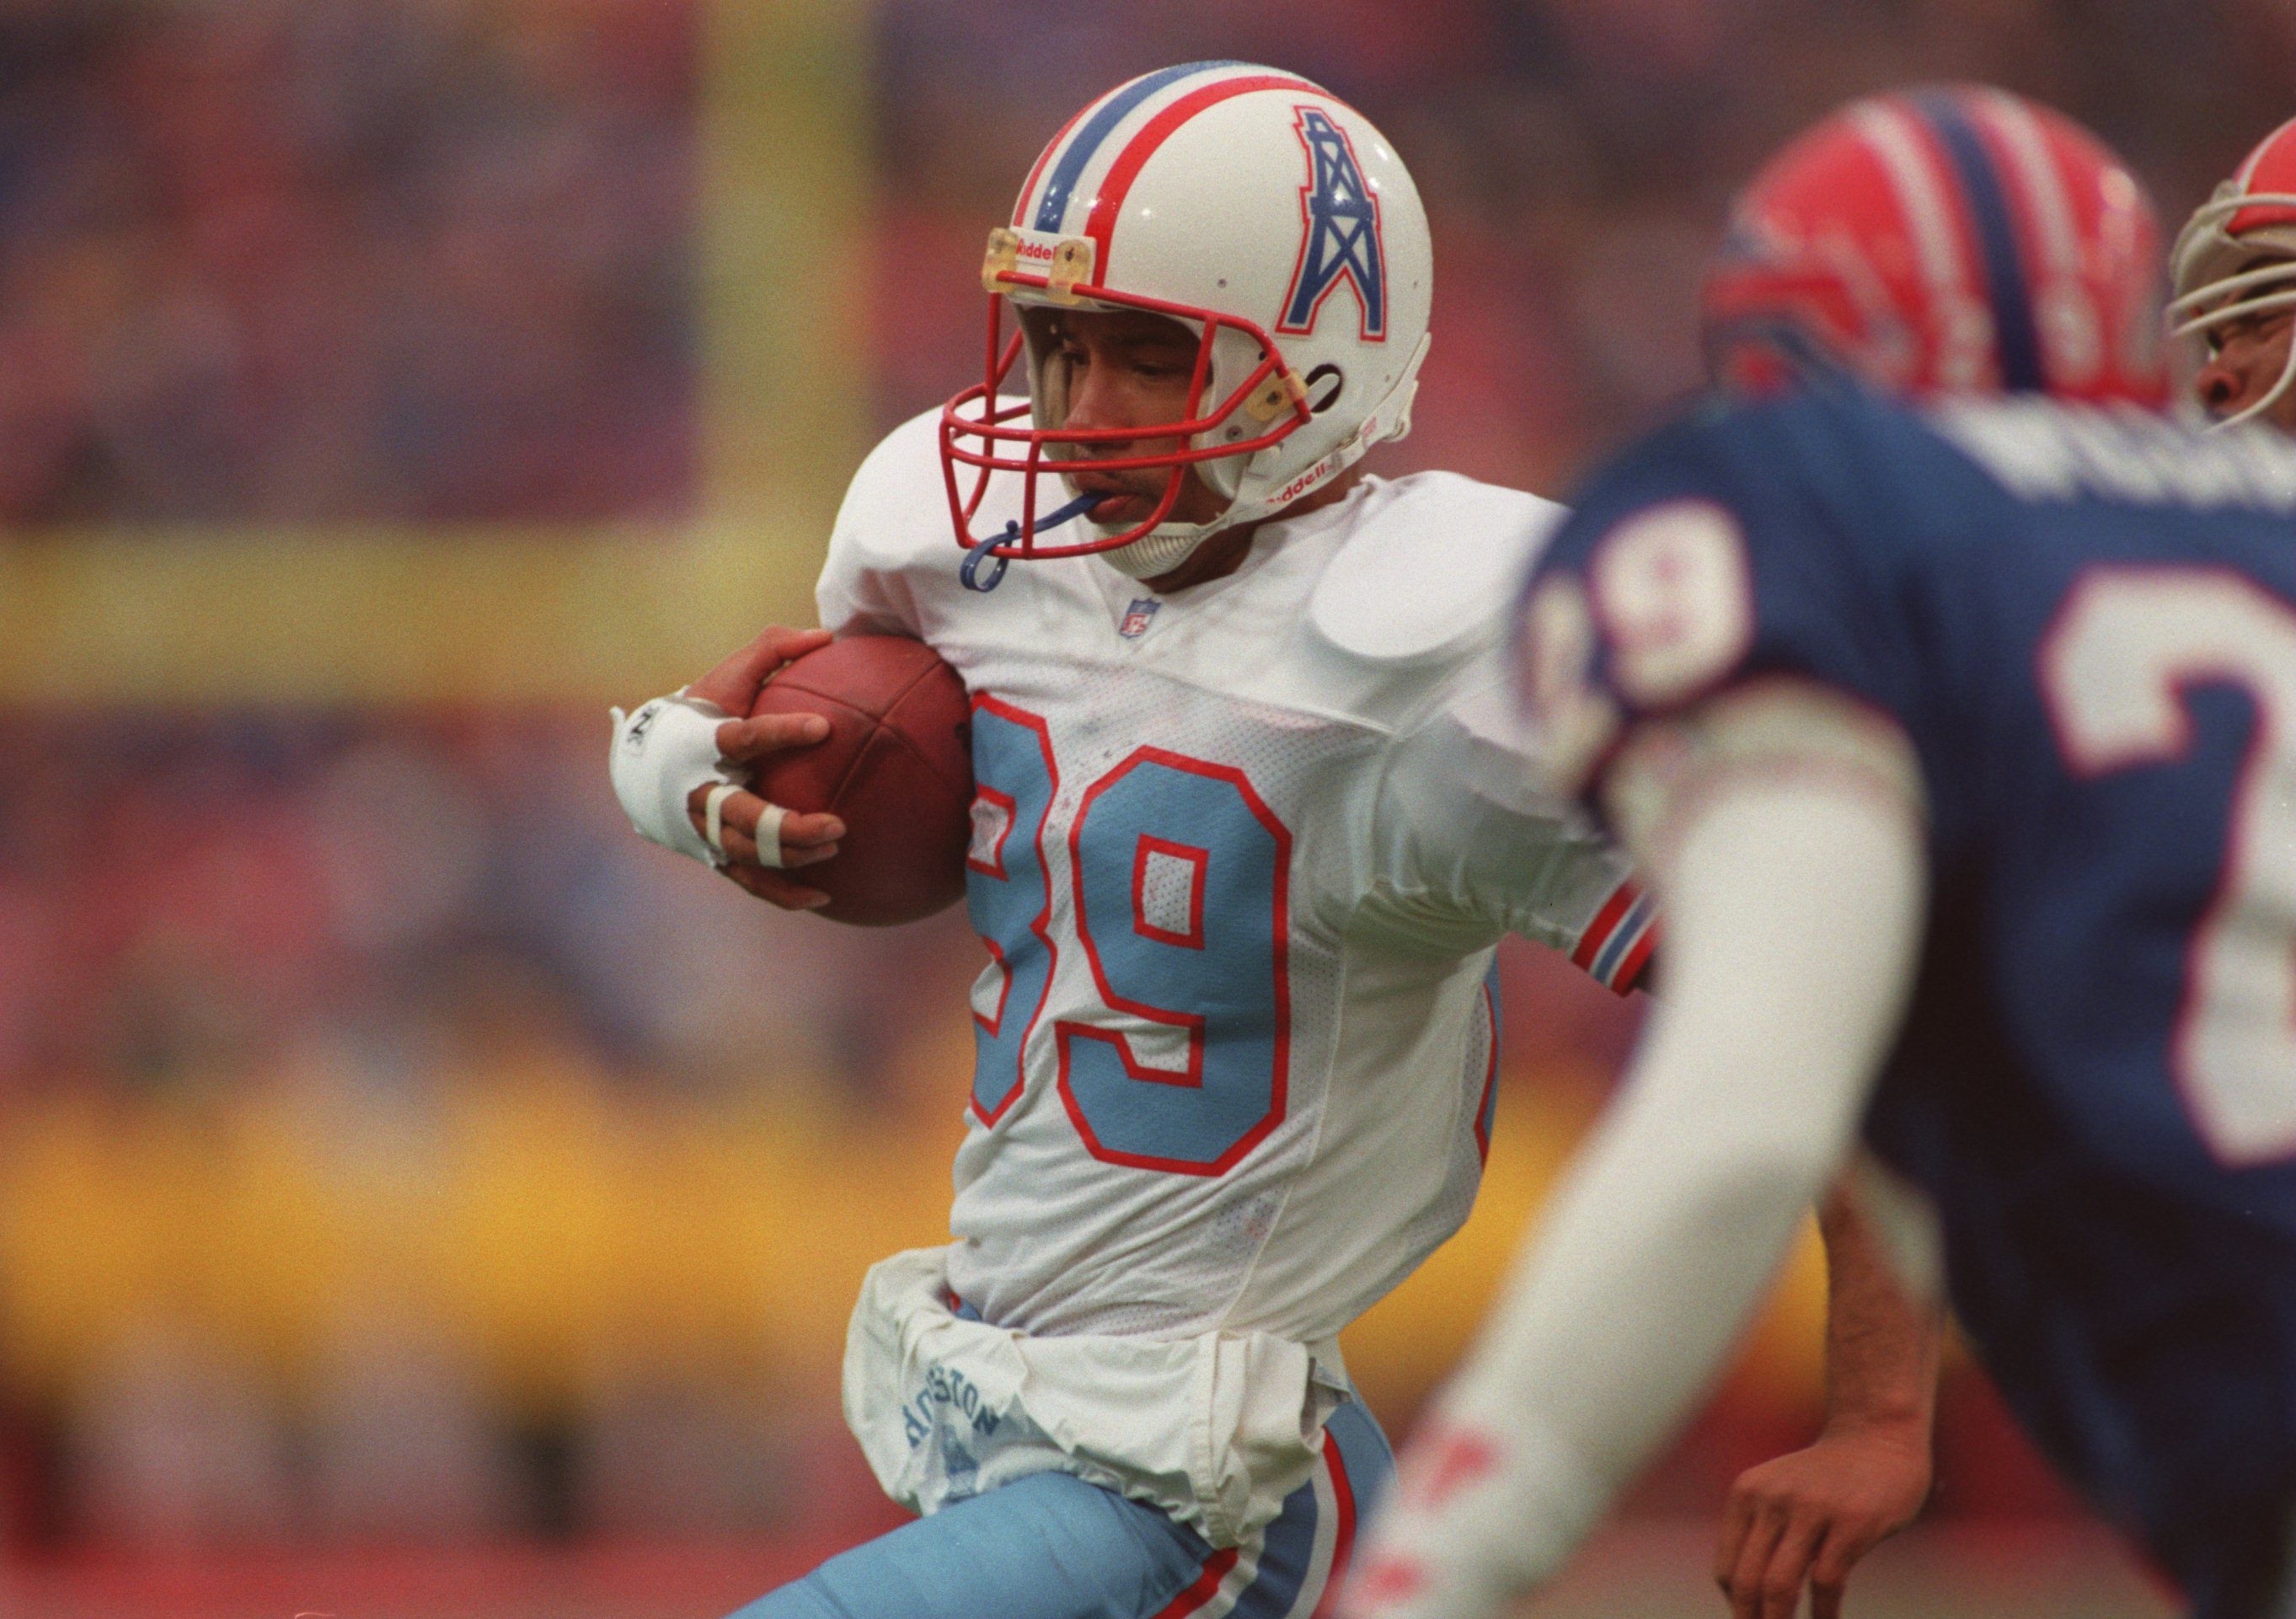 Titans Using Oilers Throwback Uniforms Sets off Houston Sports Radio Hosts